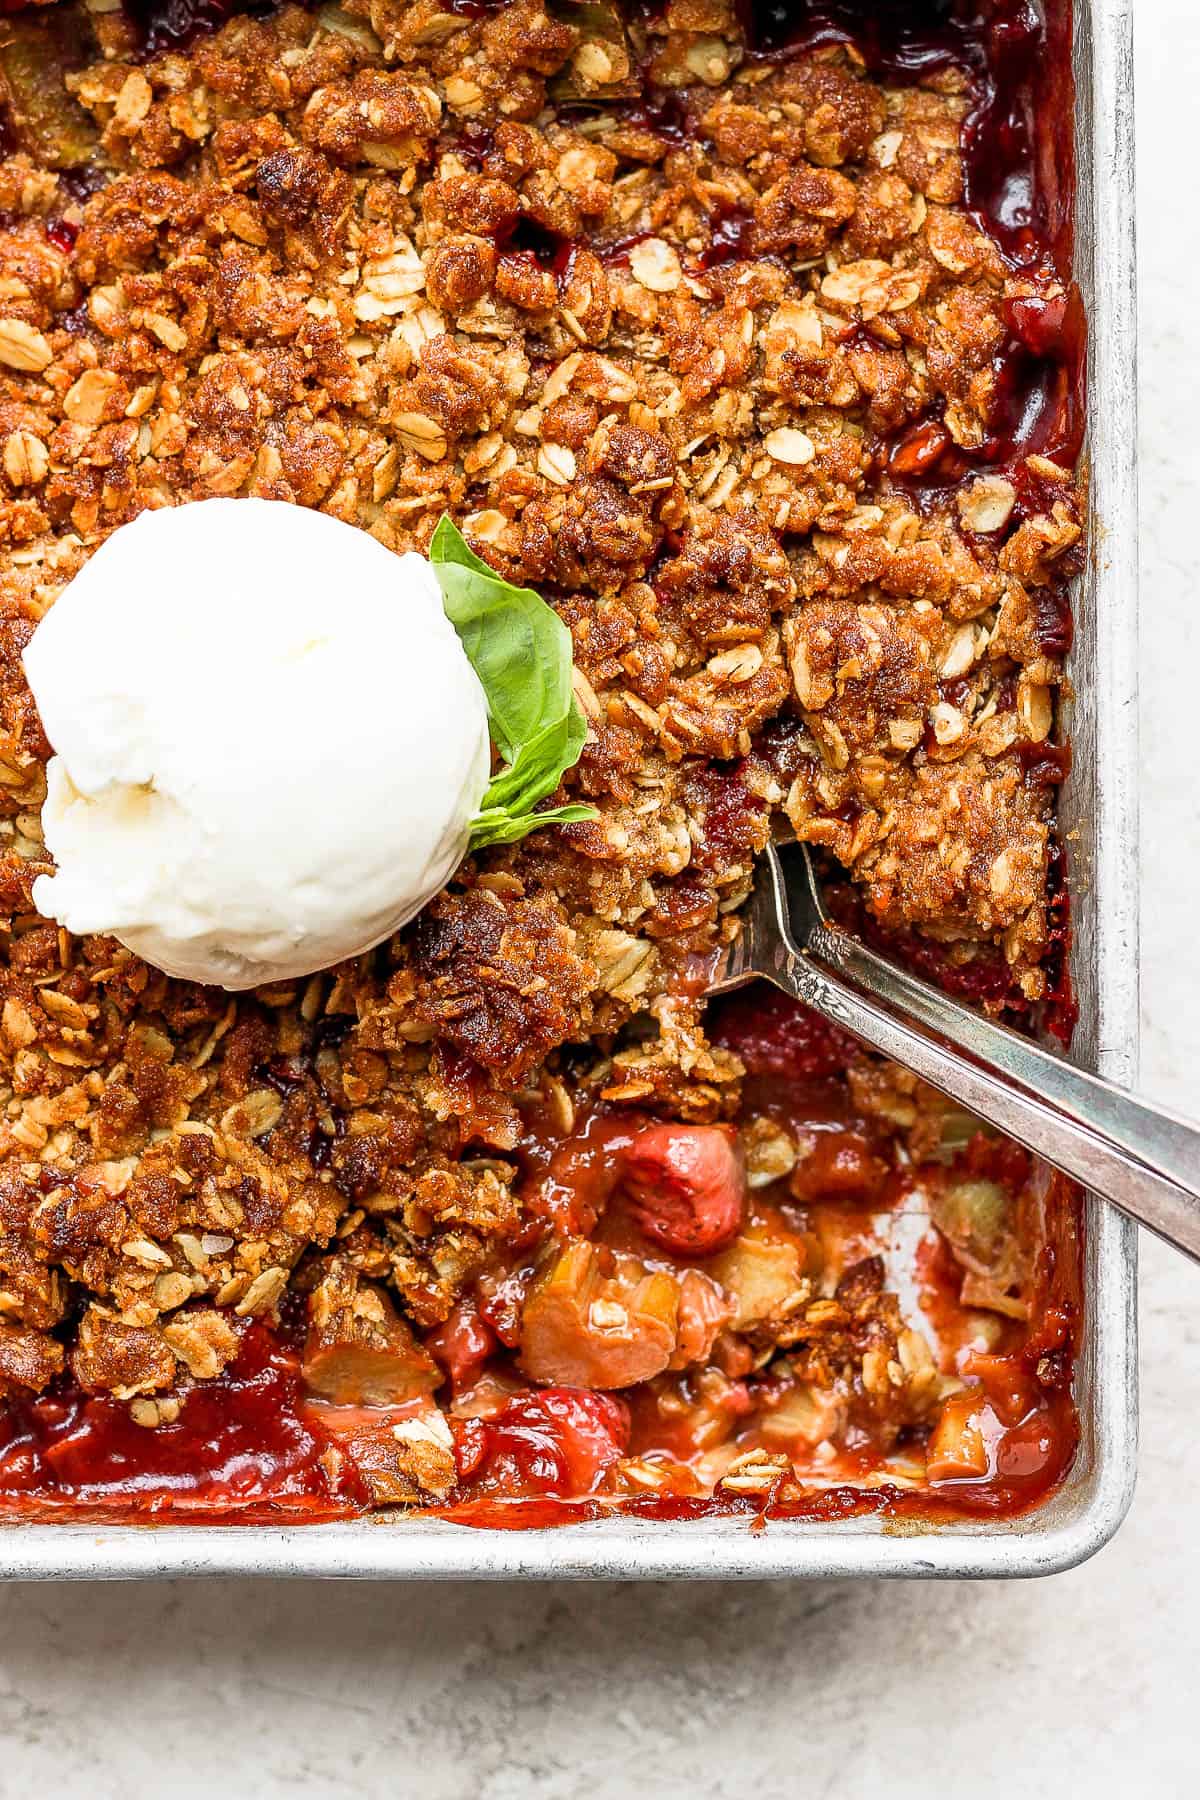 Strawberry rhubarb crisp topped with a scoop of vanilla ice cream.